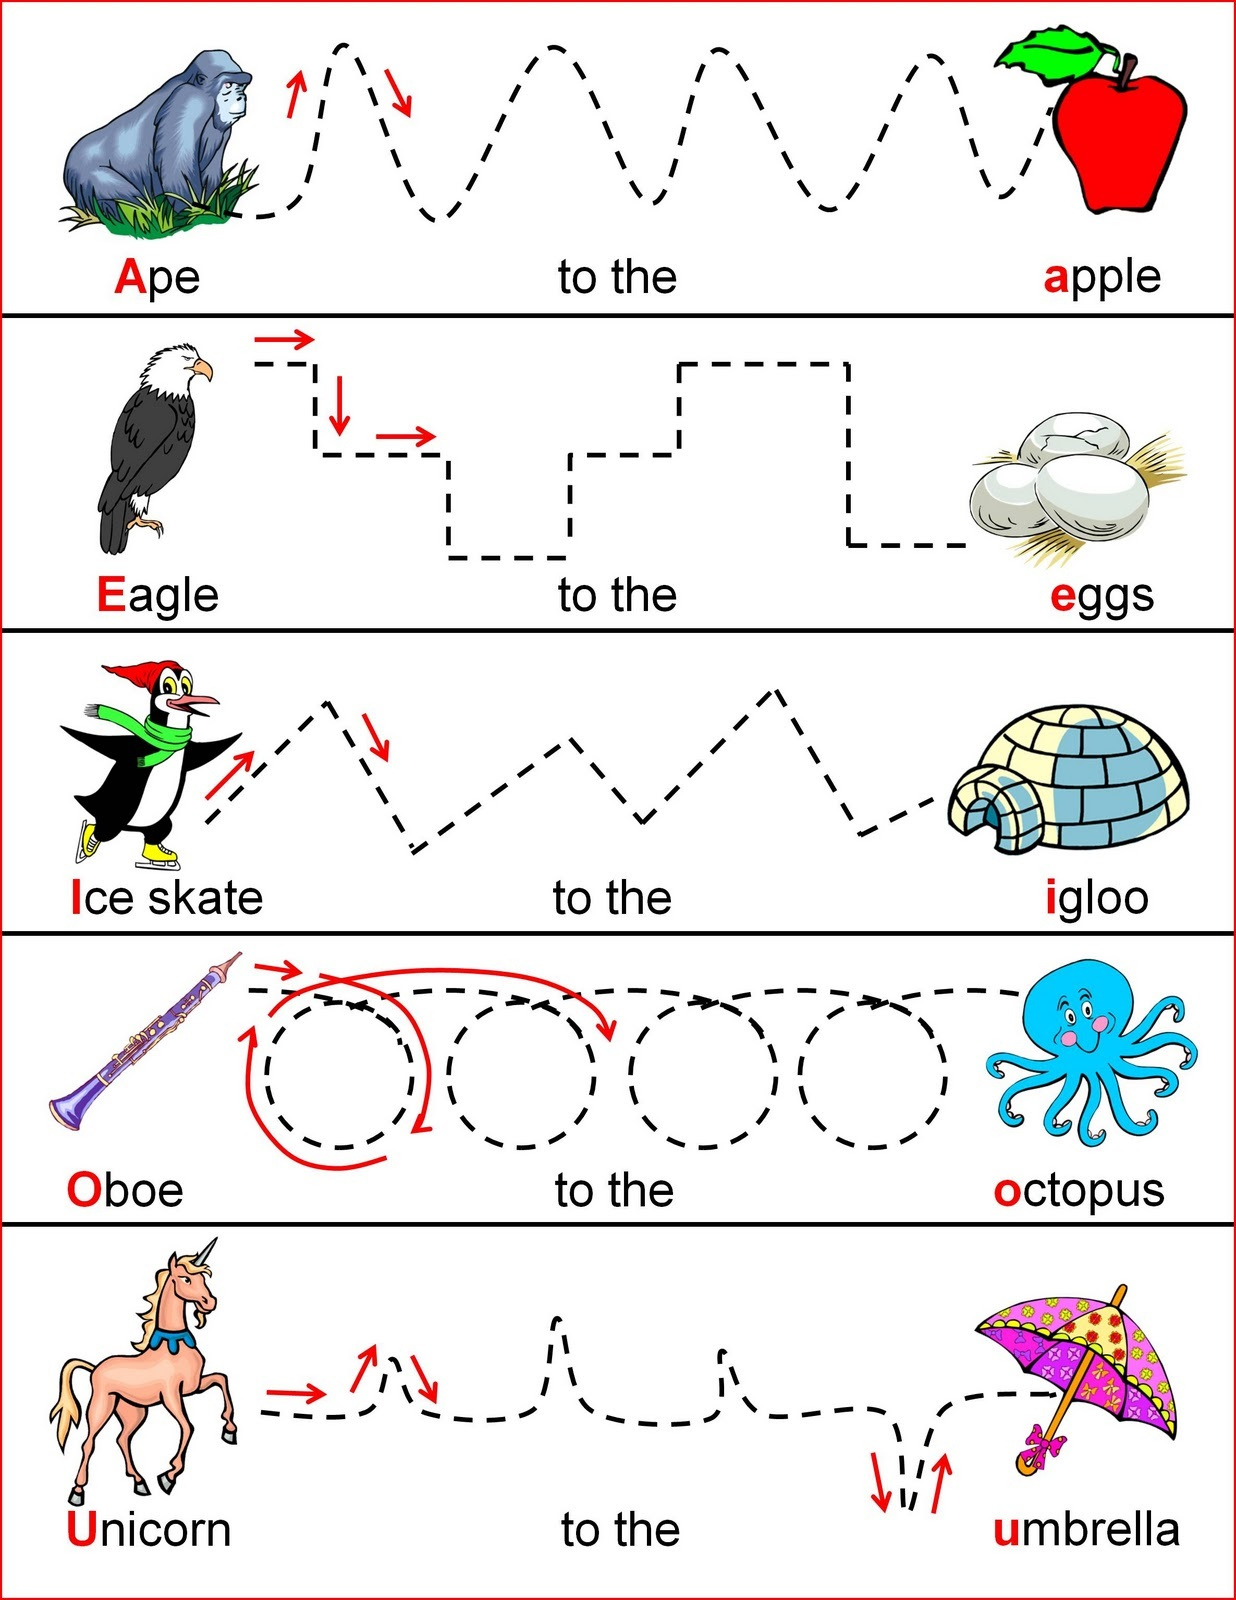 Tracing Letters Worksheets For 3 Year Olds